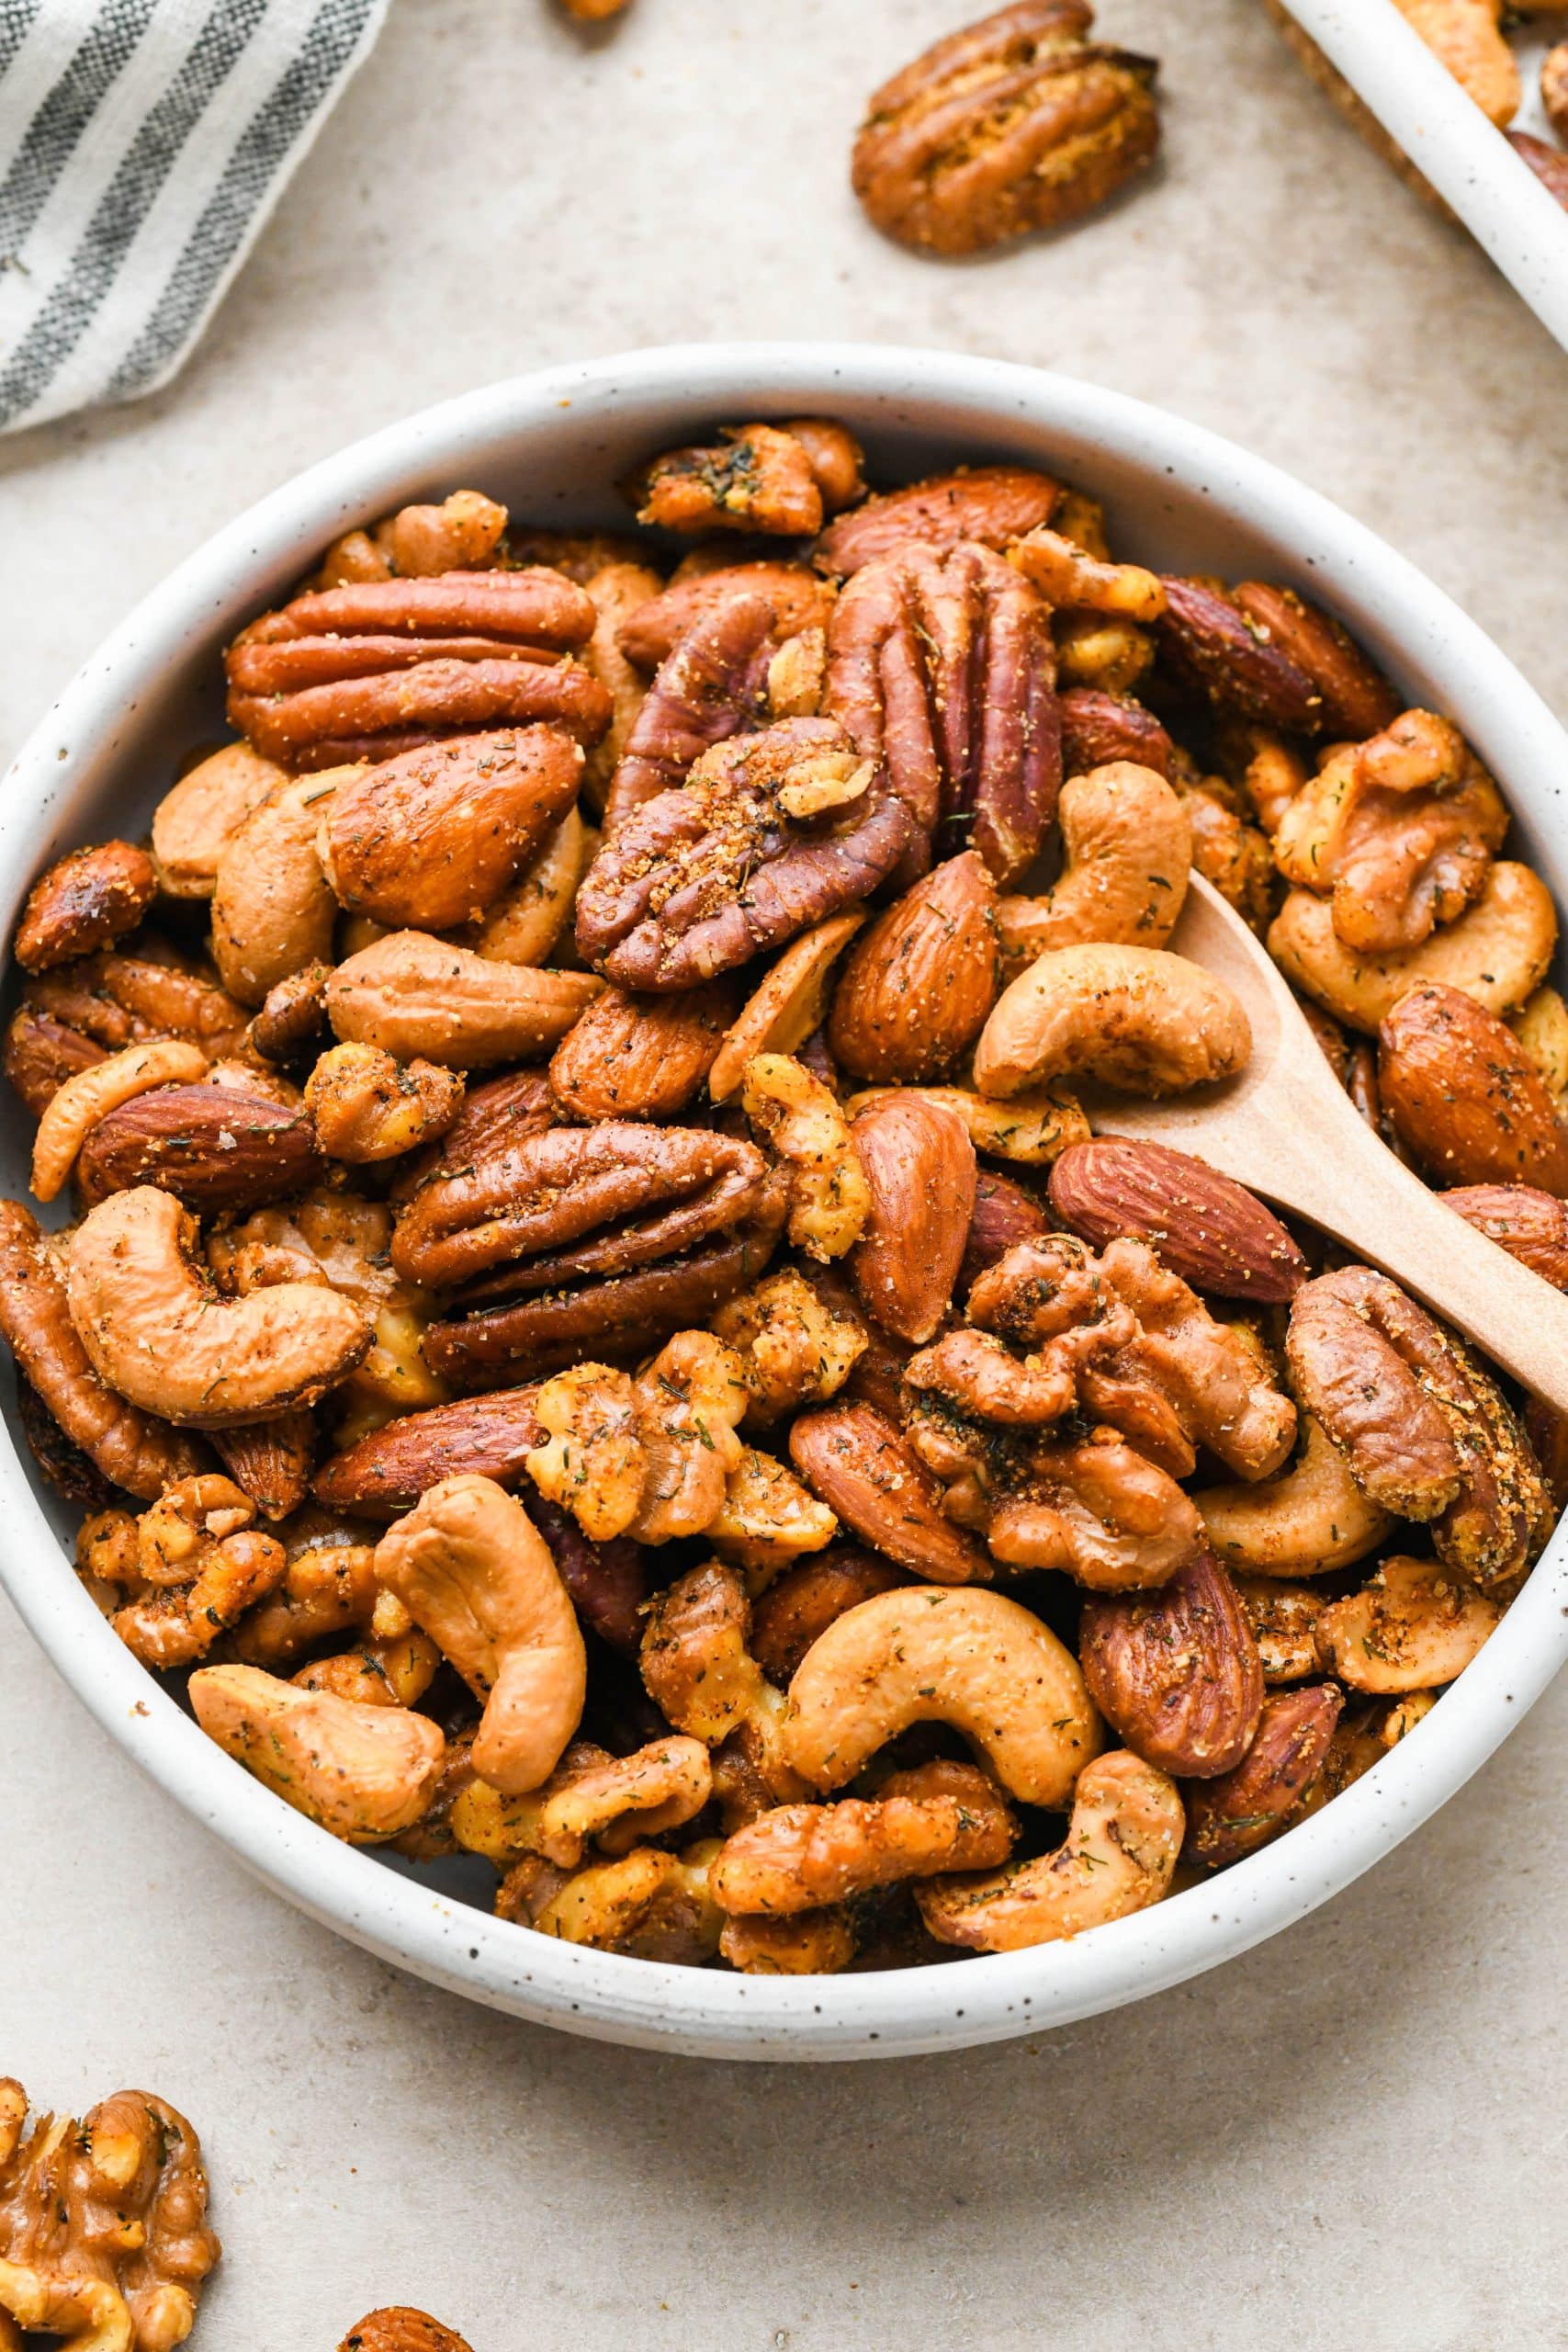 ALMOST-EVERYTHING TRAIL MIX - THE SIMPLE VEGANISTA